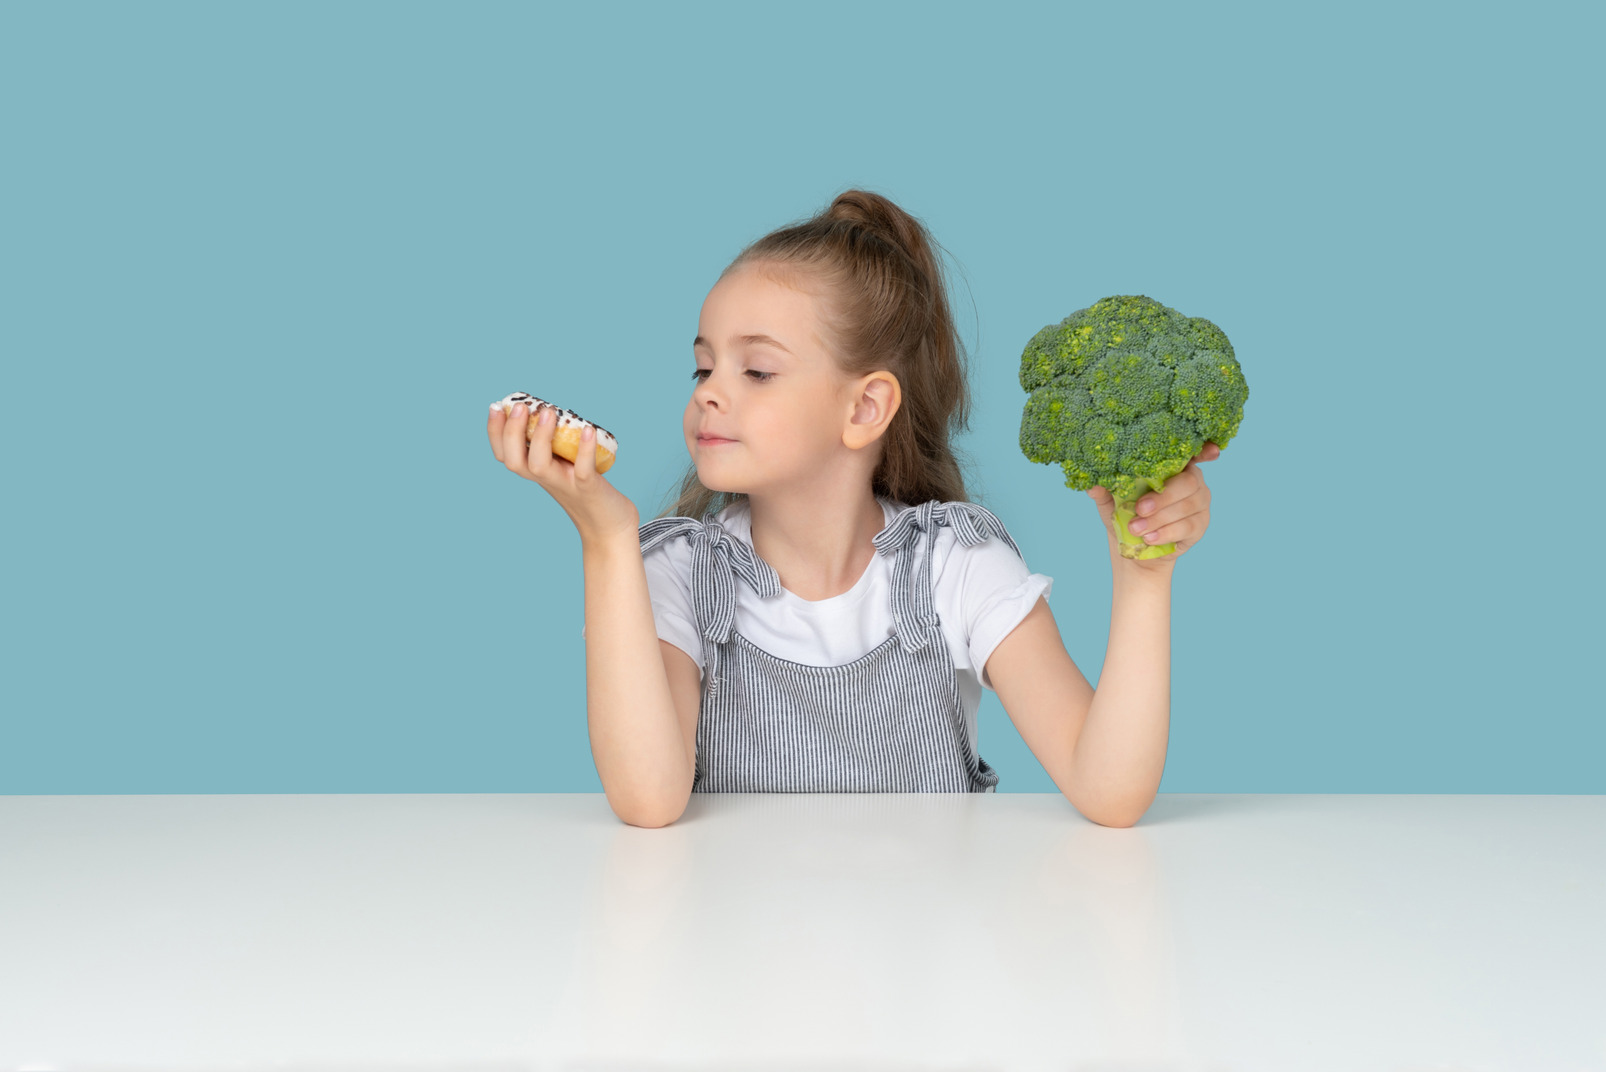 Cute little girl trying to choose between a doughnut and some broccoli